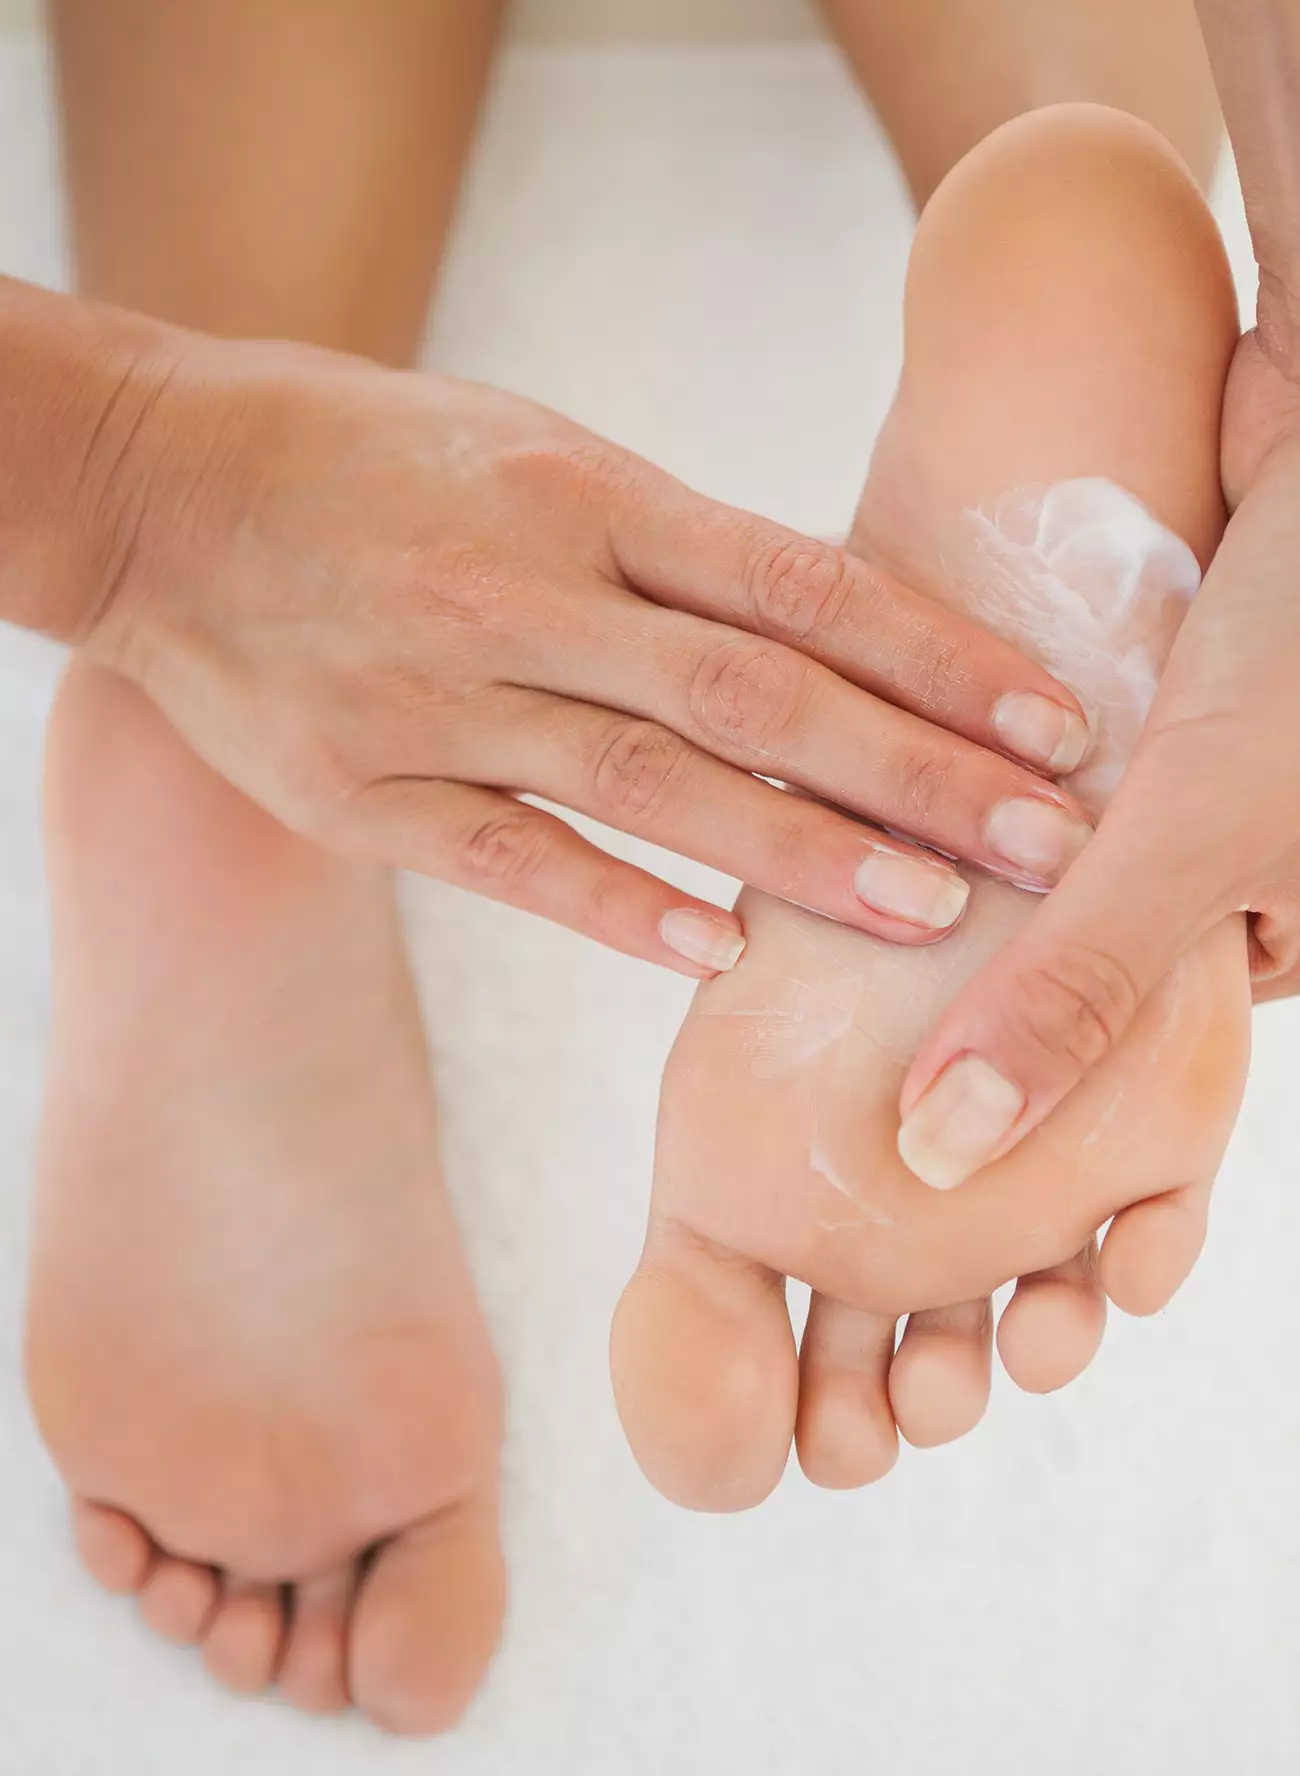 Skin care applied to foot during foot treatment